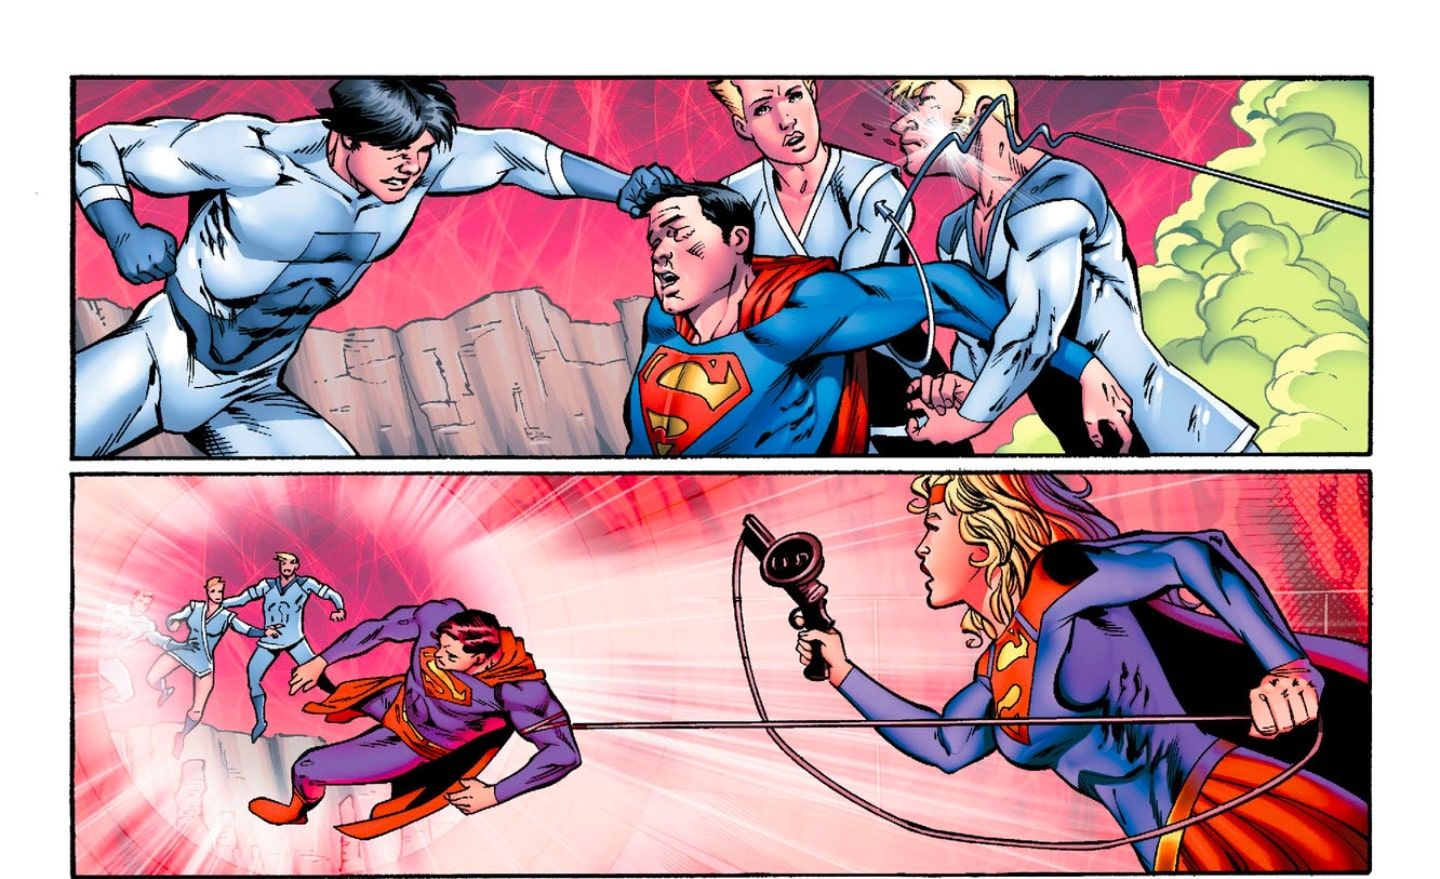 Supergirl rescuing Superman from the Phantom Zone with Batman's equipment in Convergence: Adventures of Superman #2